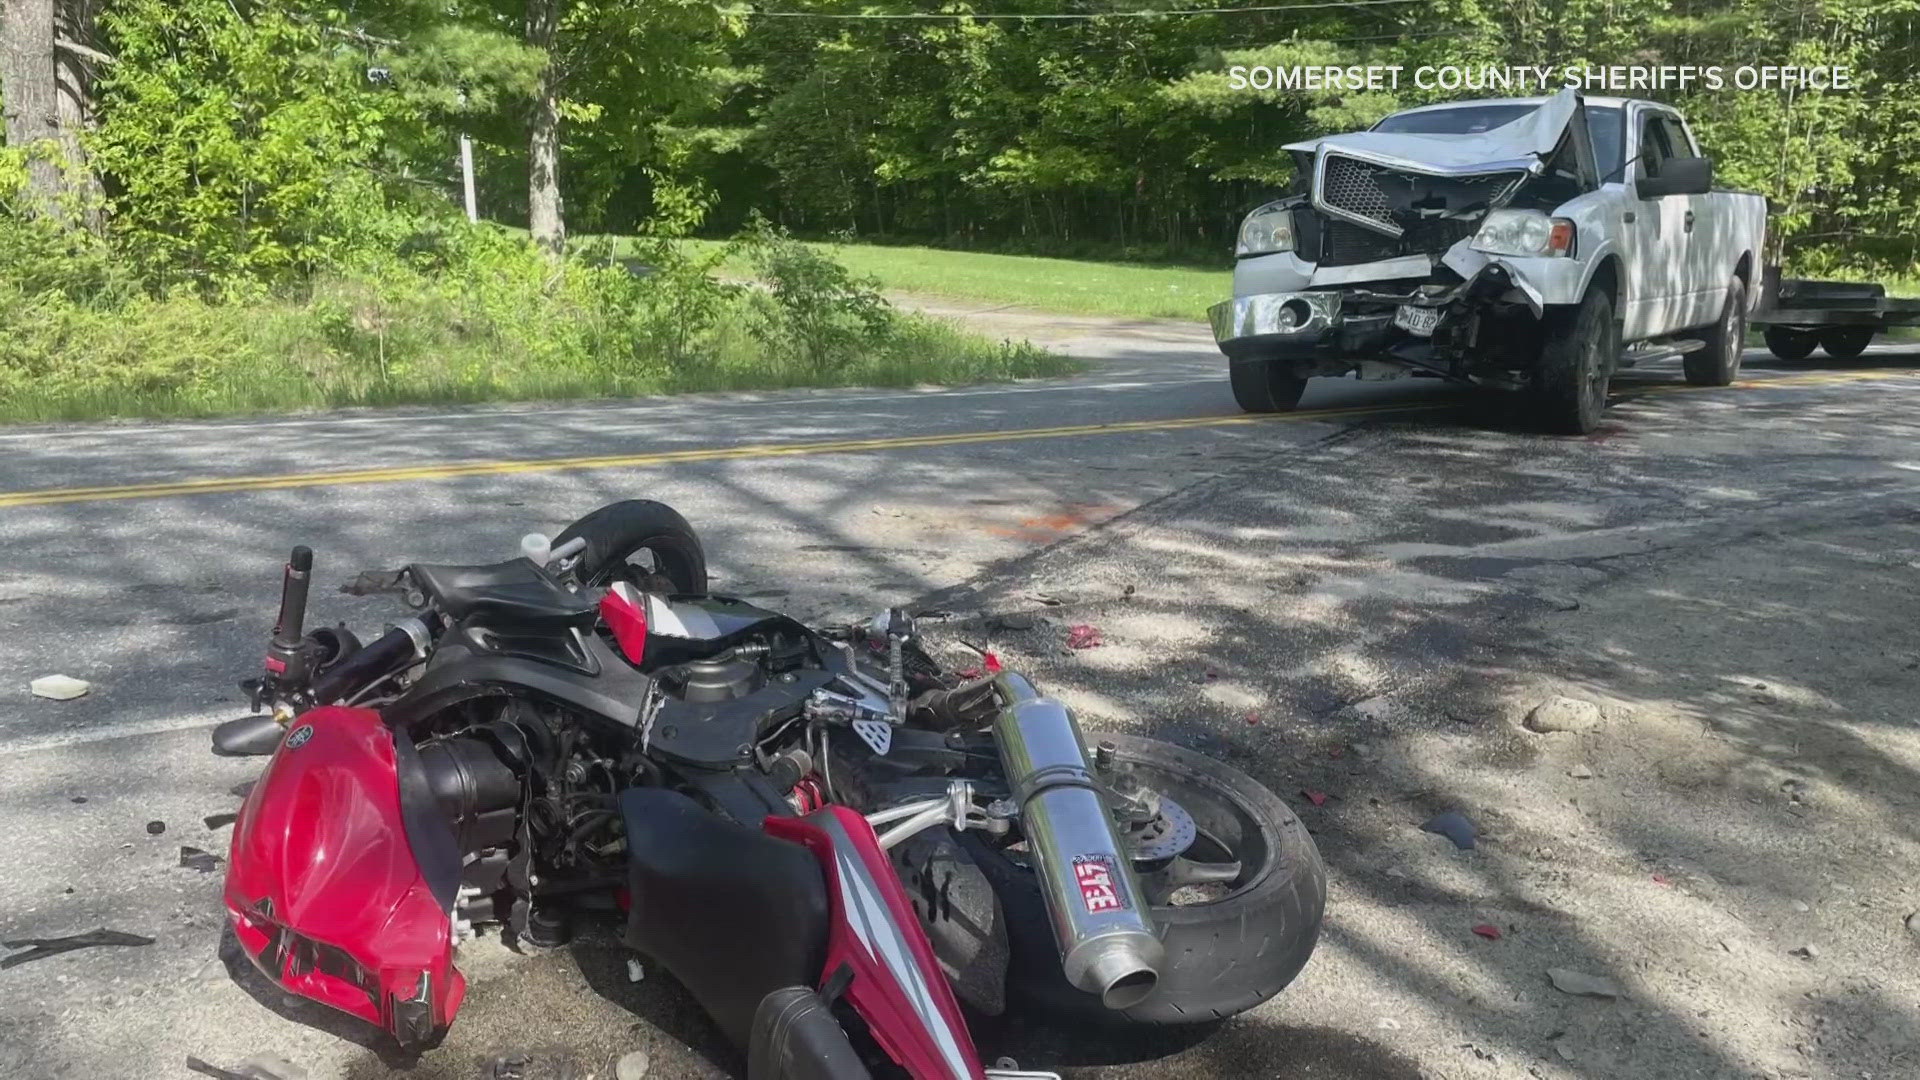 The Somerset County Sheriff's Office is investigating a two-vehicle crash in Norridgewock that claimed the life of 29-year-old Brock Peters of Fairfield.